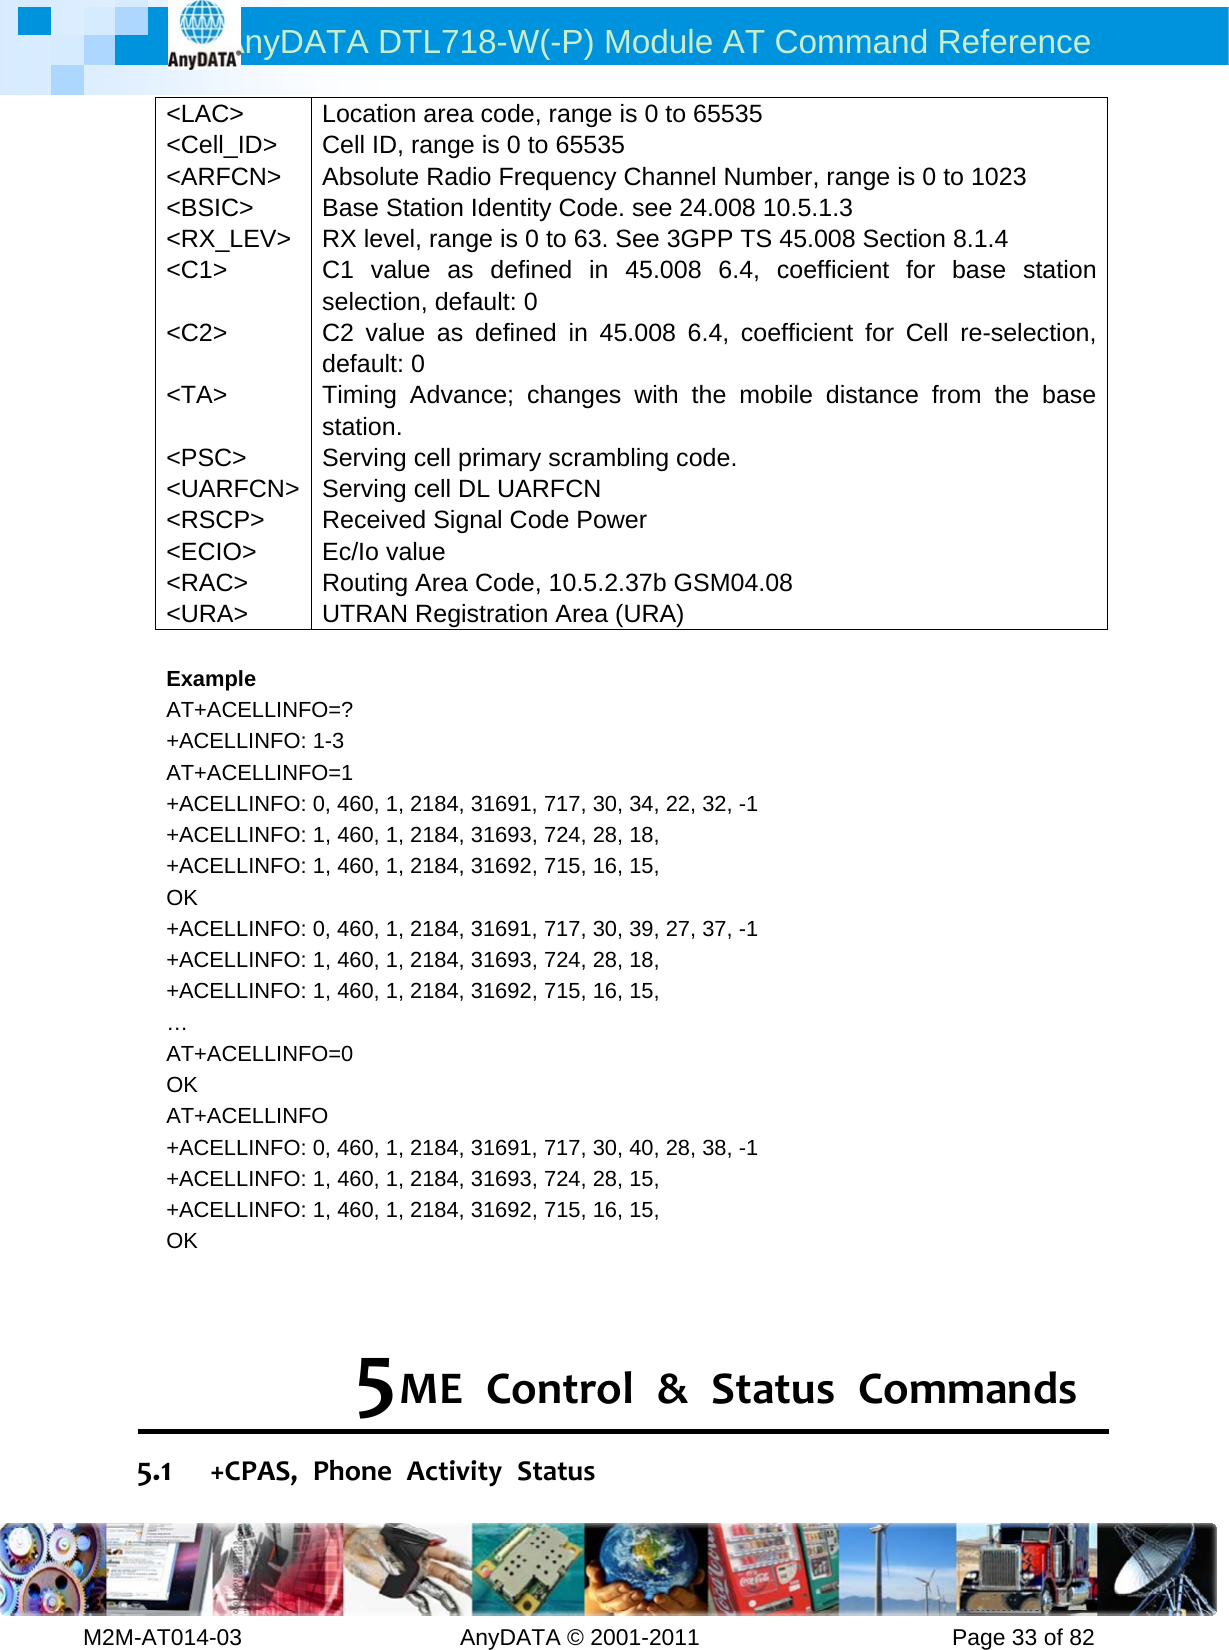 AnyDATA DTL718-W(-P) Module AT Command Reference         M2M-AT014-03                   AnyDATA © 2001-2011                      Page 33 of 82 &lt;LAC&gt; &lt;Cell_ID&gt; &lt;ARFCN&gt; &lt;BSIC&gt; &lt;RX_LEV&gt; &lt;C1&gt;  &lt;C2&gt;  &lt;TA&gt;  &lt;PSC&gt; &lt;UARFCN&gt; &lt;RSCP&gt; &lt;ECIO&gt; &lt;RAC&gt; &lt;URA&gt; Location area code, range is 0 to 65535 Cell ID, range is 0 to 65535 Absolute Radio Frequency Channel Number, range is 0 to 1023 Base Station Identity Code. see 24.008 10.5.1.3 RX level, range is 0 to 63. See 3GPP TS 45.008 Section 8.1.4 C1 value as defined in 45.008 6.4, coefficient for base station selection, default: 0   C2 value as defined in 45.008 6.4, coefficient for Cell re-selection, default: 0   Timing Advance; changes with the mobile distance from the base station. Serving cell primary scrambling code. Serving cell DL UARFCN Received Signal Code Power Ec/Io value Routing Area Code, 10.5.2.37b GSM04.08 UTRAN Registration Area (URA)  Example AT+ACELLINFO=? +ACELLINFO: 1-3 AT+ACELLINFO=1 +ACELLINFO: 0, 460, 1, 2184, 31691, 717, 30, 34, 22, 32, -1 +ACELLINFO: 1, 460, 1, 2184, 31693, 724, 28, 18, +ACELLINFO: 1, 460, 1, 2184, 31692, 715, 16, 15, OK +ACELLINFO: 0, 460, 1, 2184, 31691, 717, 30, 39, 27, 37, -1 +ACELLINFO: 1, 460, 1, 2184, 31693, 724, 28, 18, +ACELLINFO: 1, 460, 1, 2184, 31692, 715, 16, 15, … AT+ACELLINFO=0 OK AT+ACELLINFO +ACELLINFO: 0, 460, 1, 2184, 31691, 717, 30, 40, 28, 38, -1 +ACELLINFO: 1, 460, 1, 2184, 31693, 724, 28, 15, +ACELLINFO: 1, 460, 1, 2184, 31692, 715, 16, 15, OK   5 MEControl&amp;StatusCommands5.1 +CPAS,PhoneActivityStatus